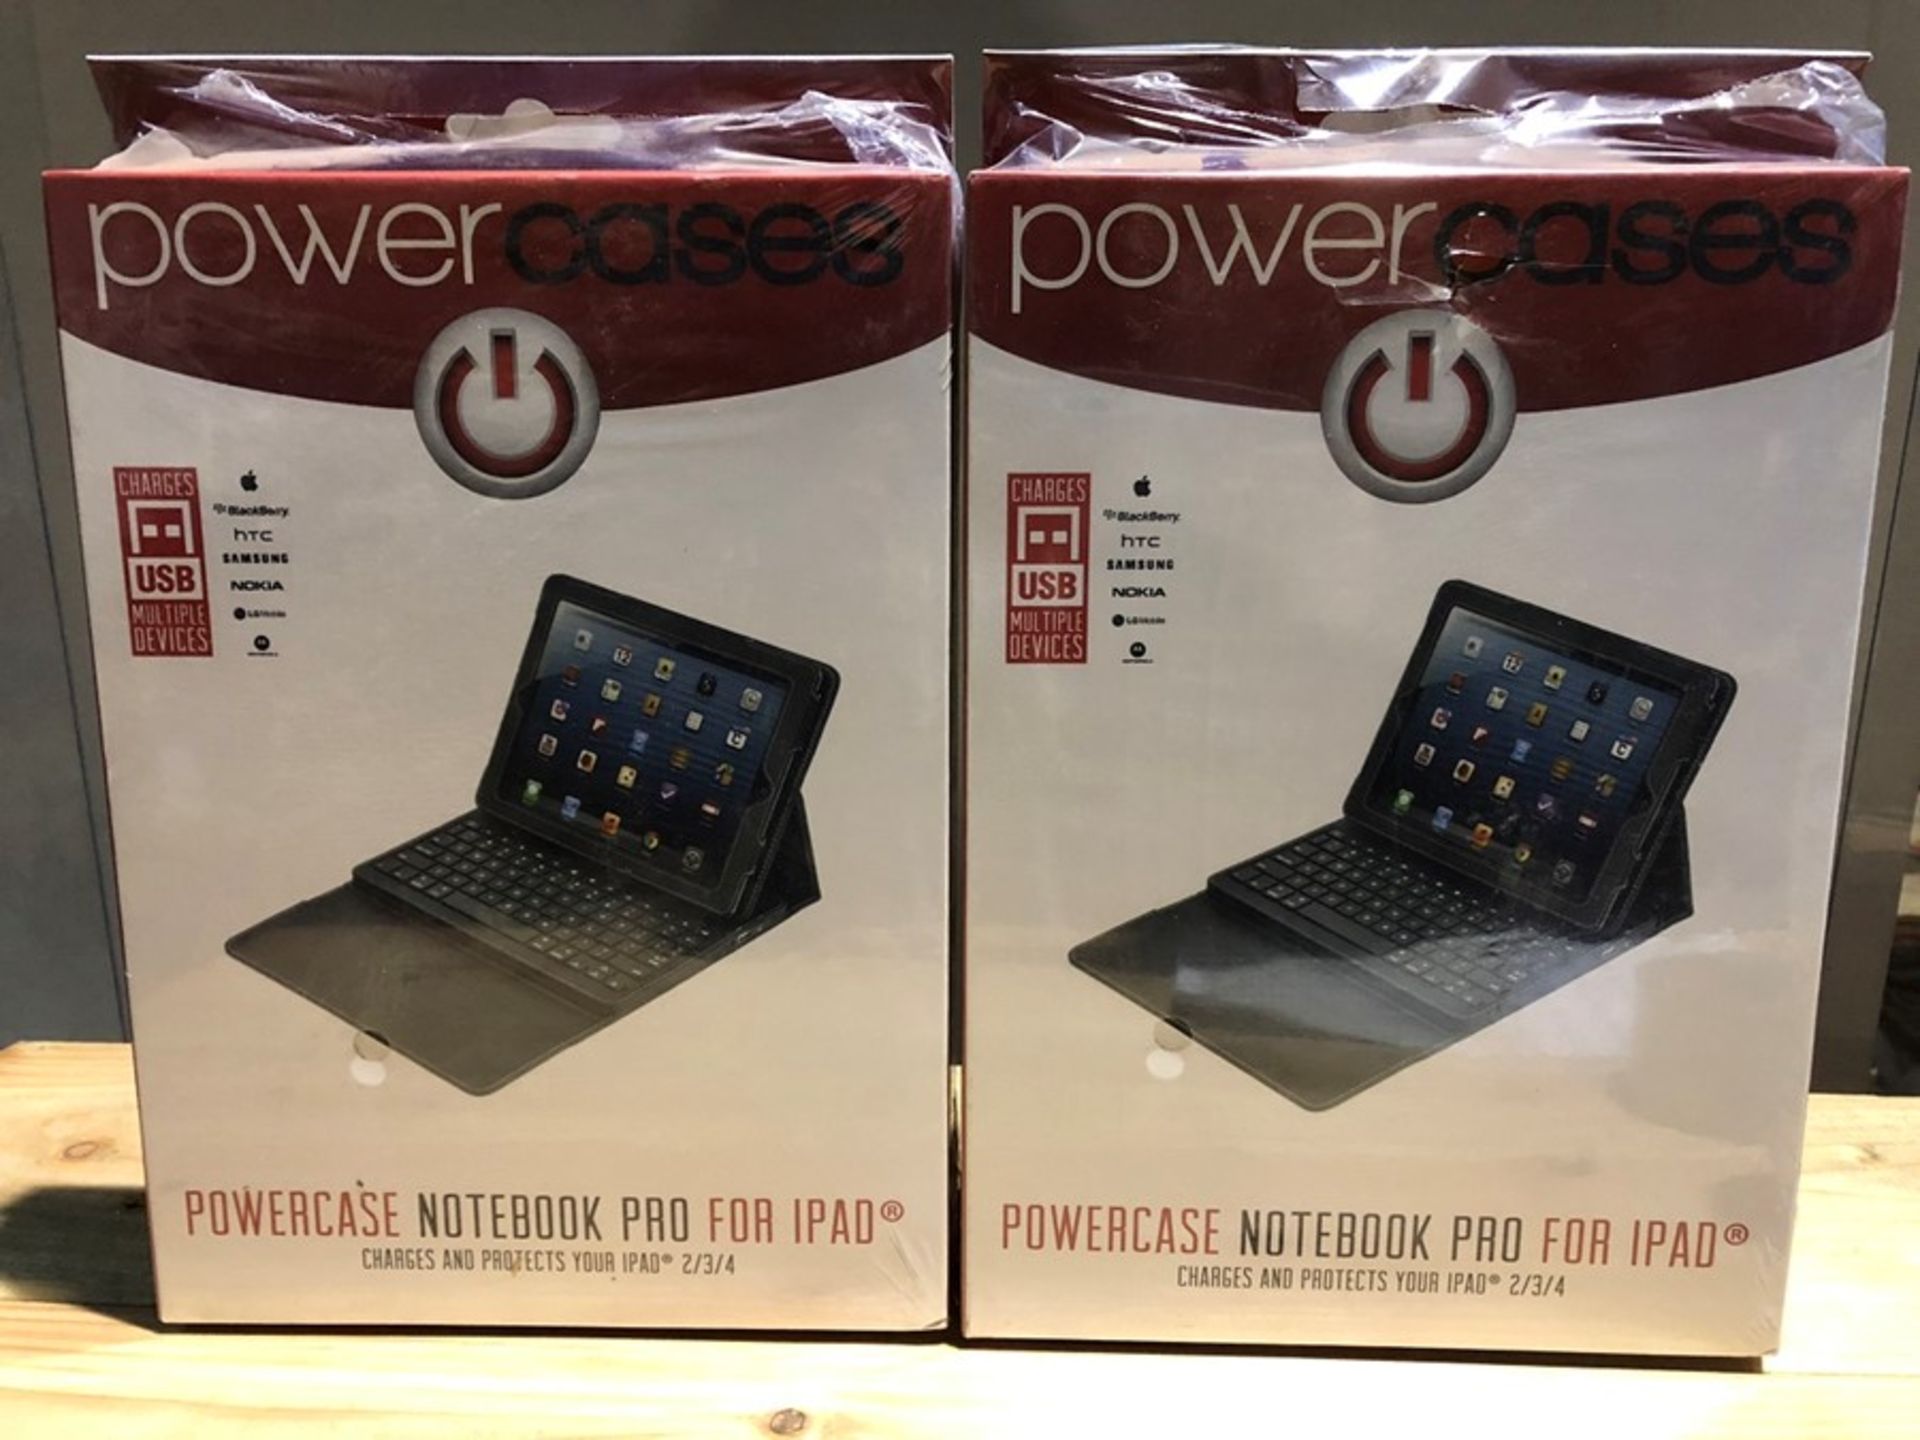 1 LOT TO CONTAIN 2 POWERCASES POWERCASE NOTEBOOK PRO FOR IPAD 2/3/4 - COMES WITH KEYBOARD / RRP £